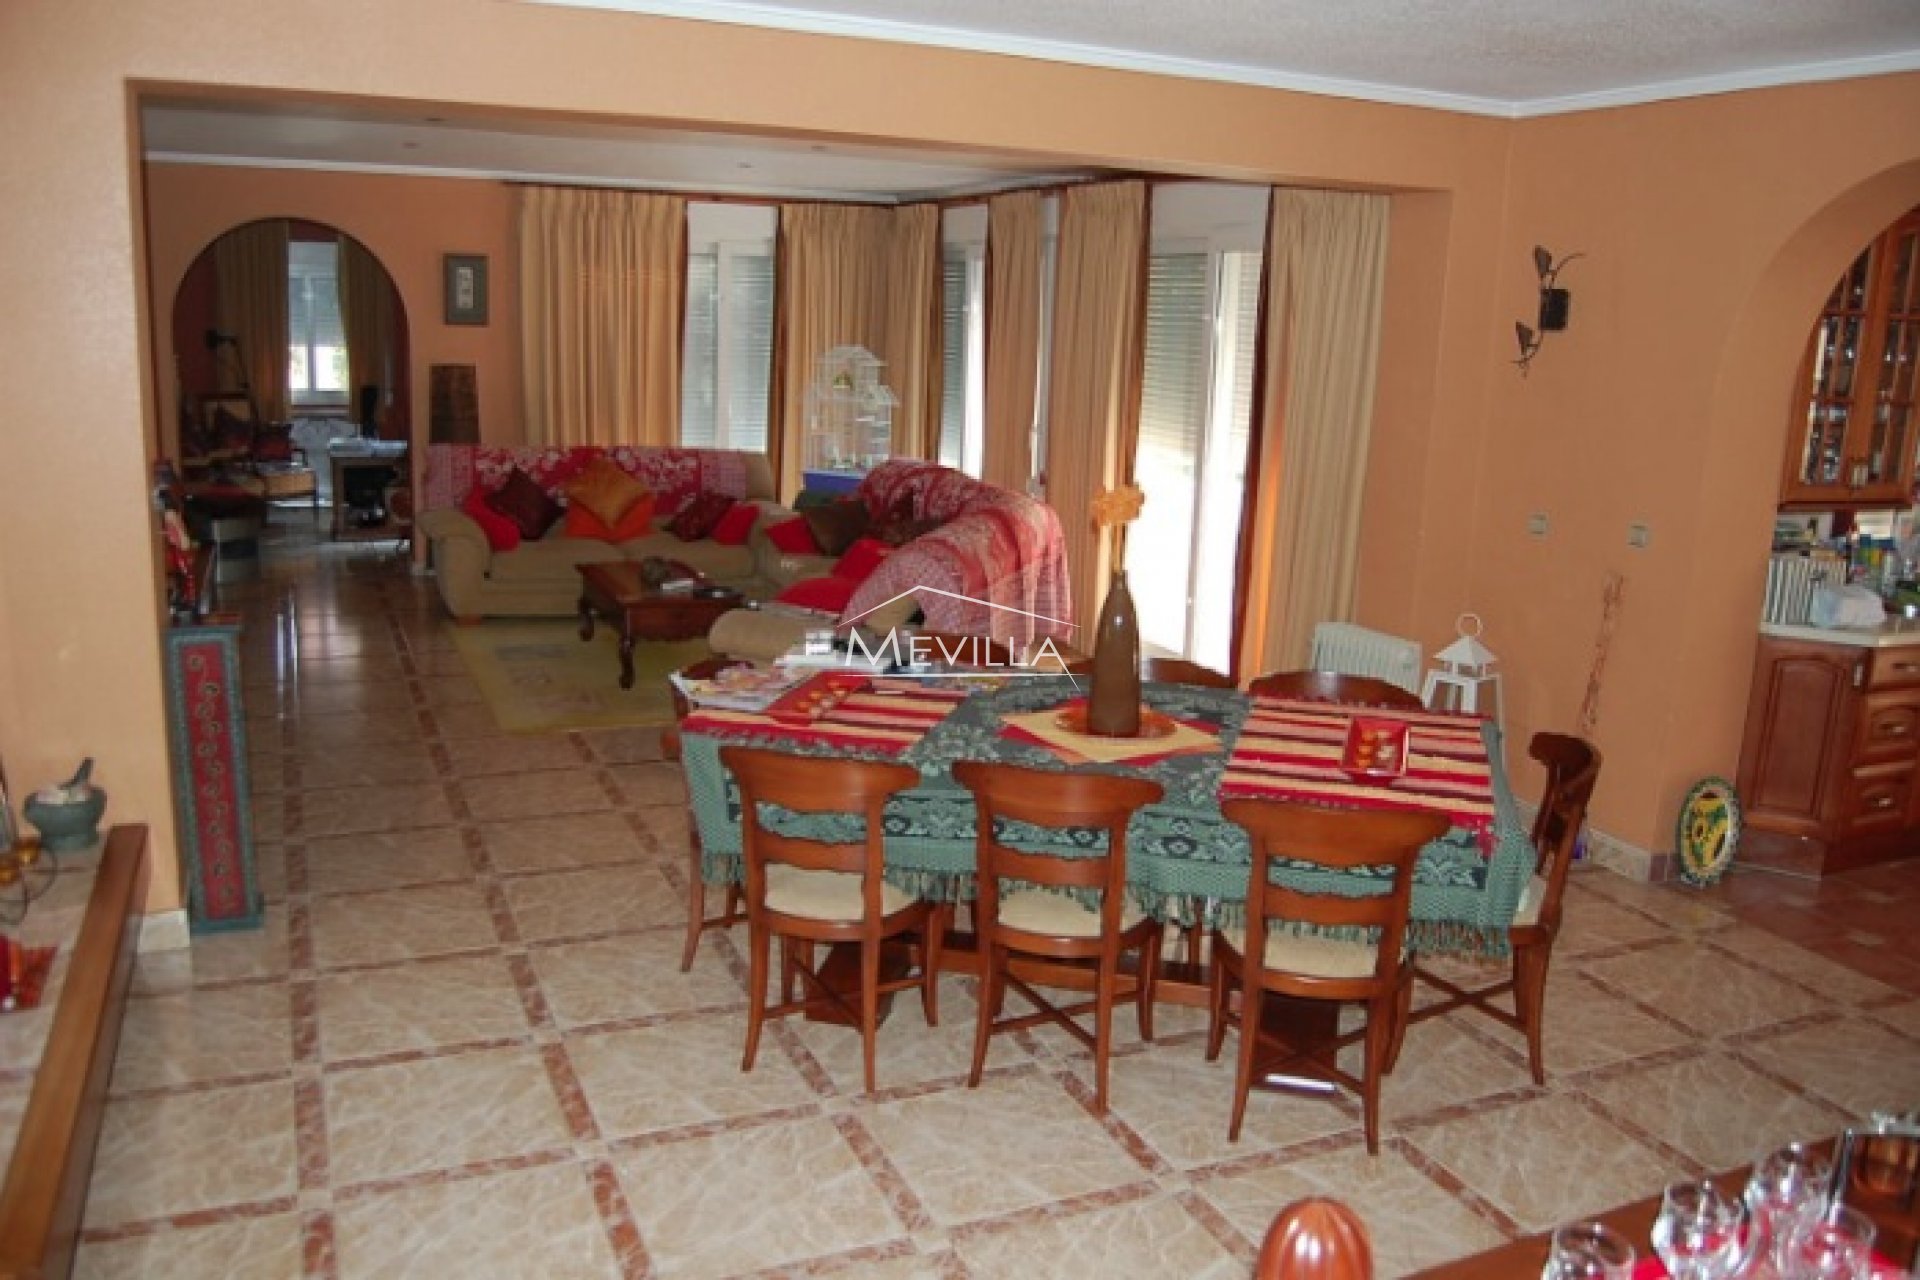 The dining area 